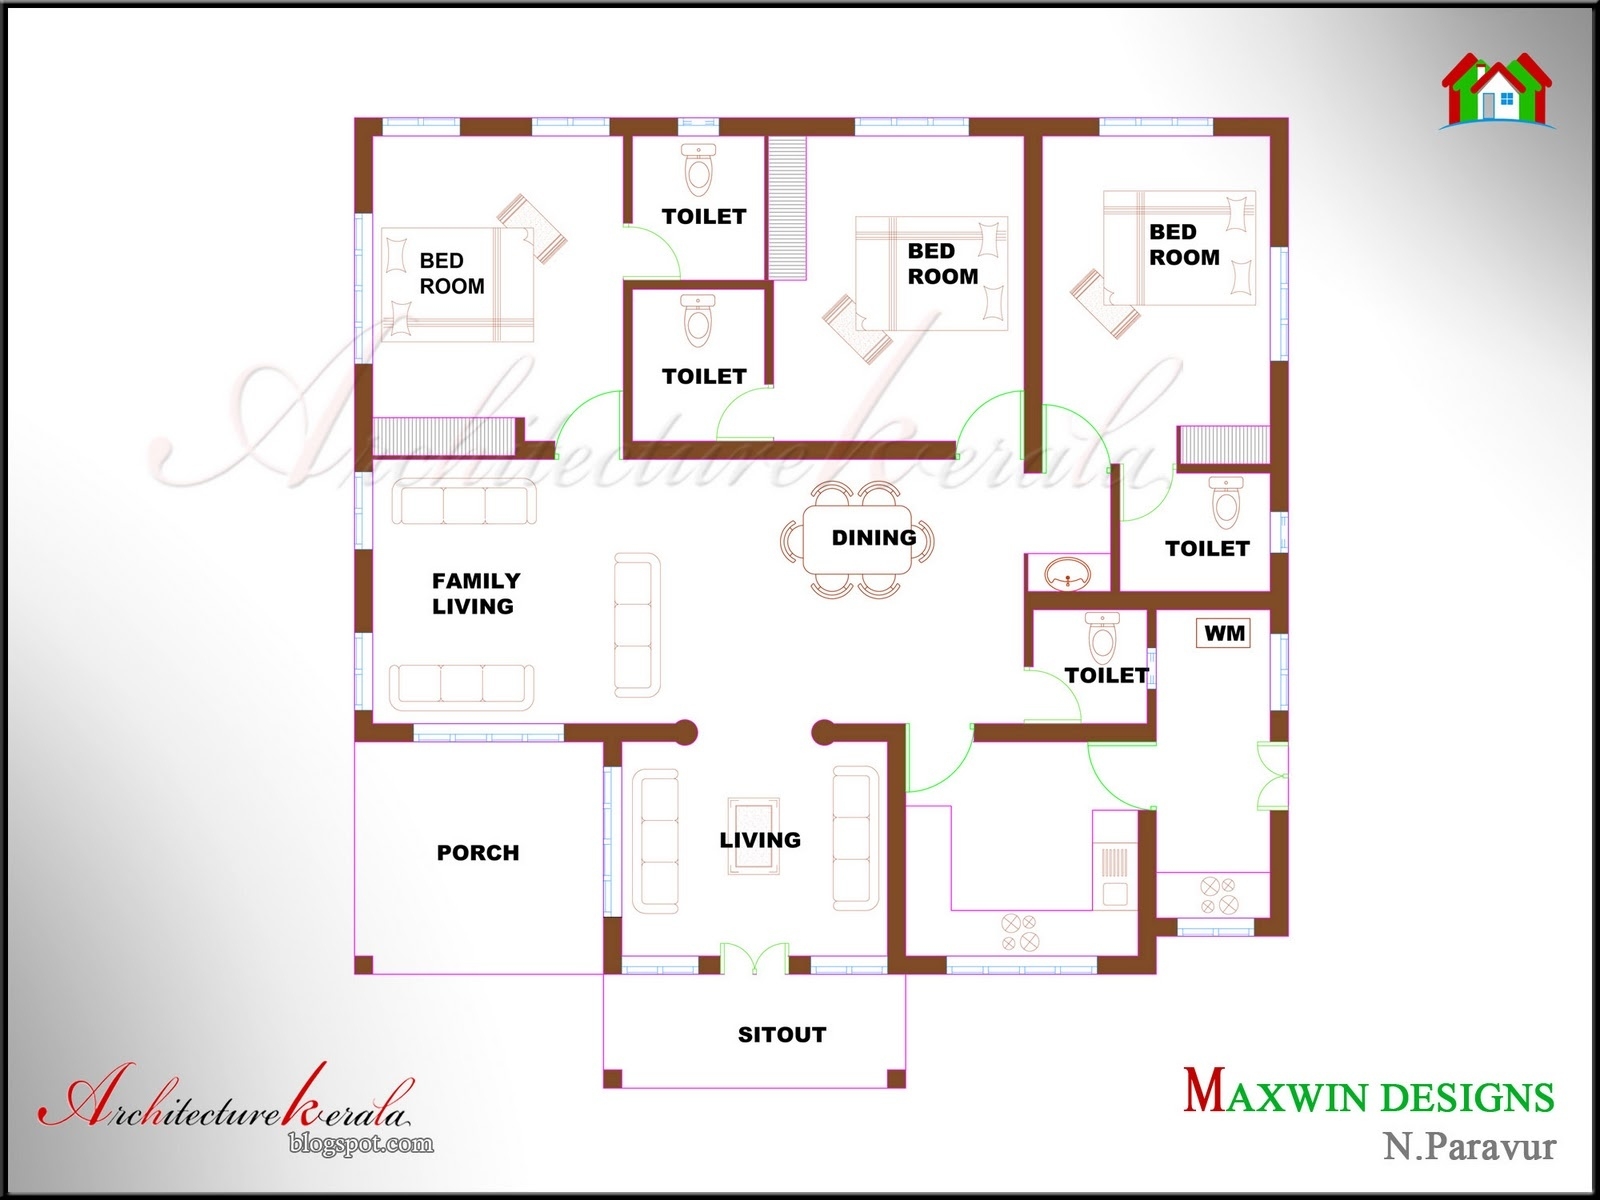 Remarkable 27 best kerala style house floor plans house plans | 88269 regarding awesome three bedroom house plans kerala style